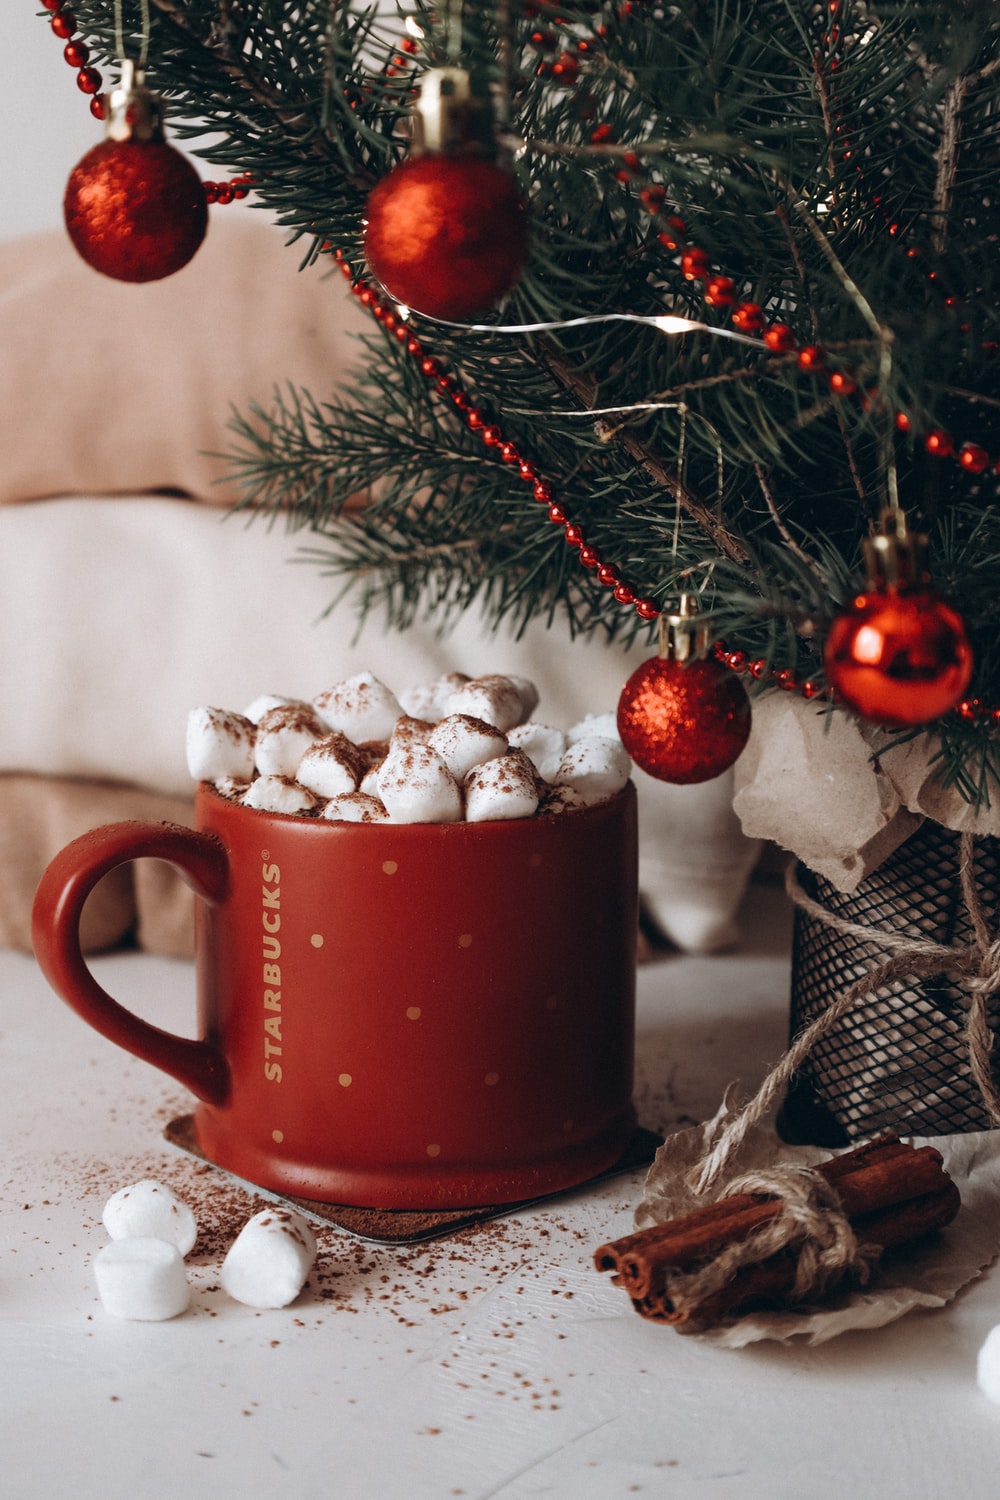 Christmas Coffee Picture. Download Free Image